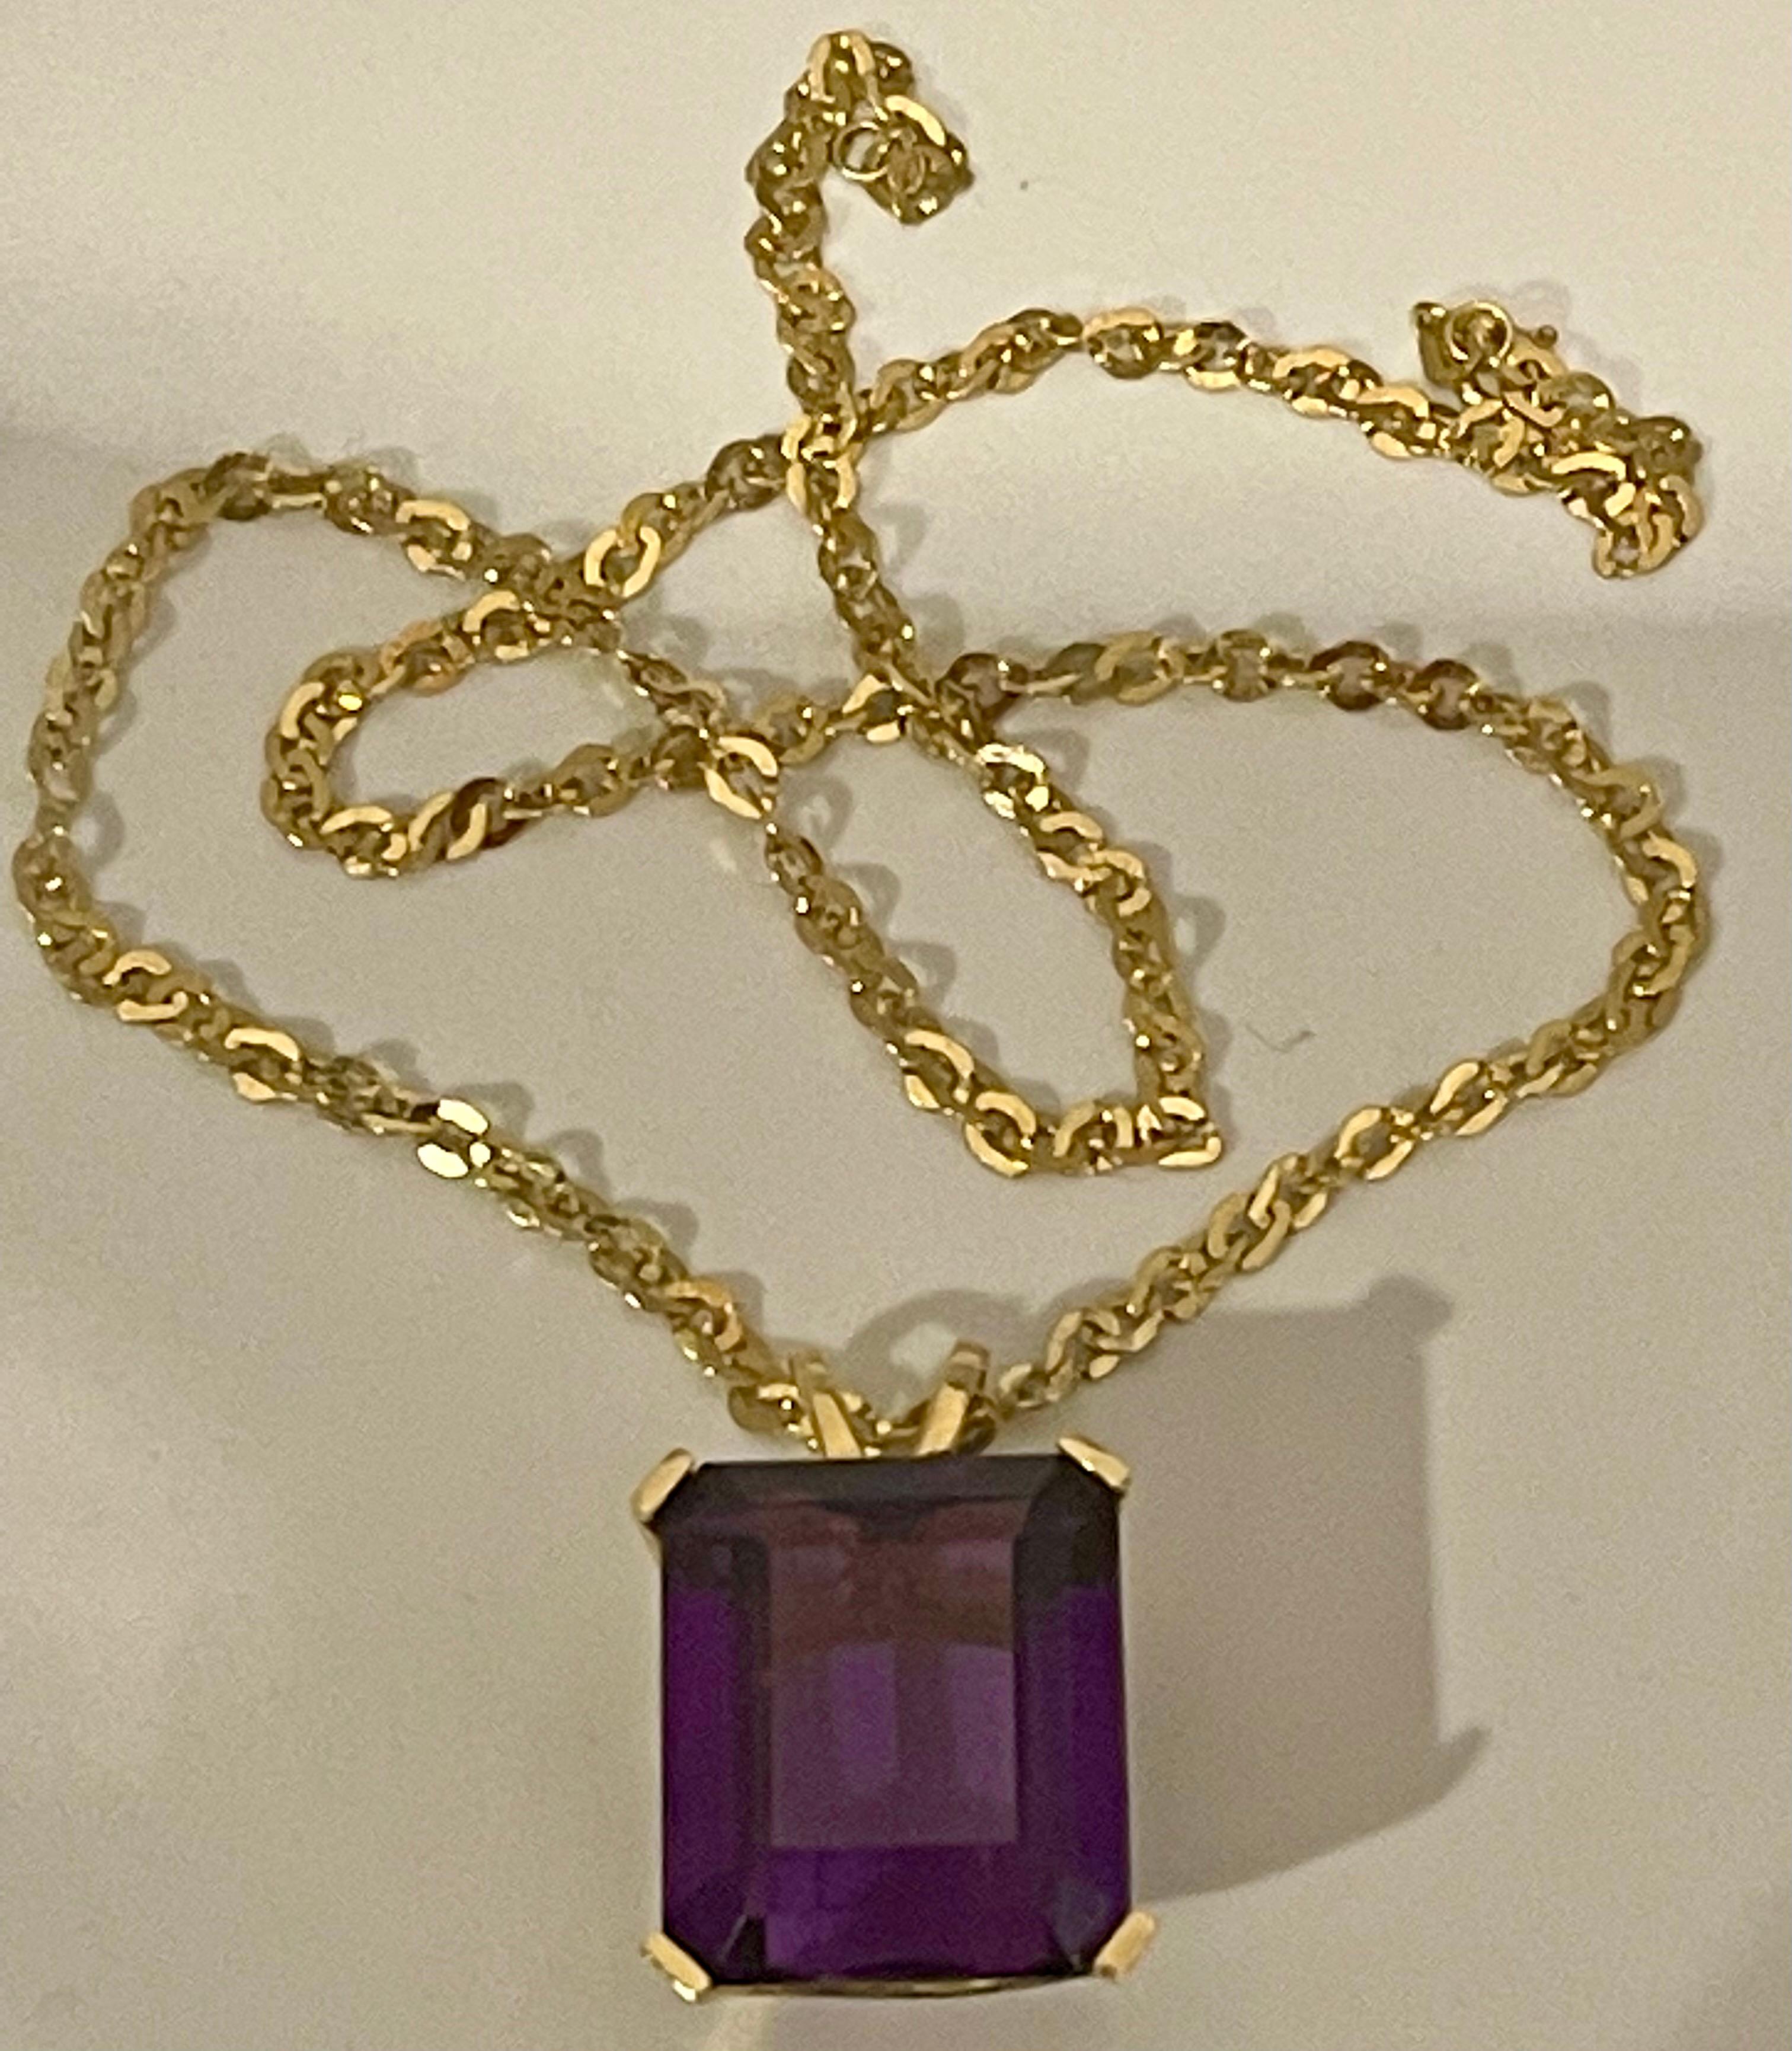 42 Ct Emerald Cut Amethyst Pendant /Necklace + 14 Kt Yellow Gold Chain Vintage 10